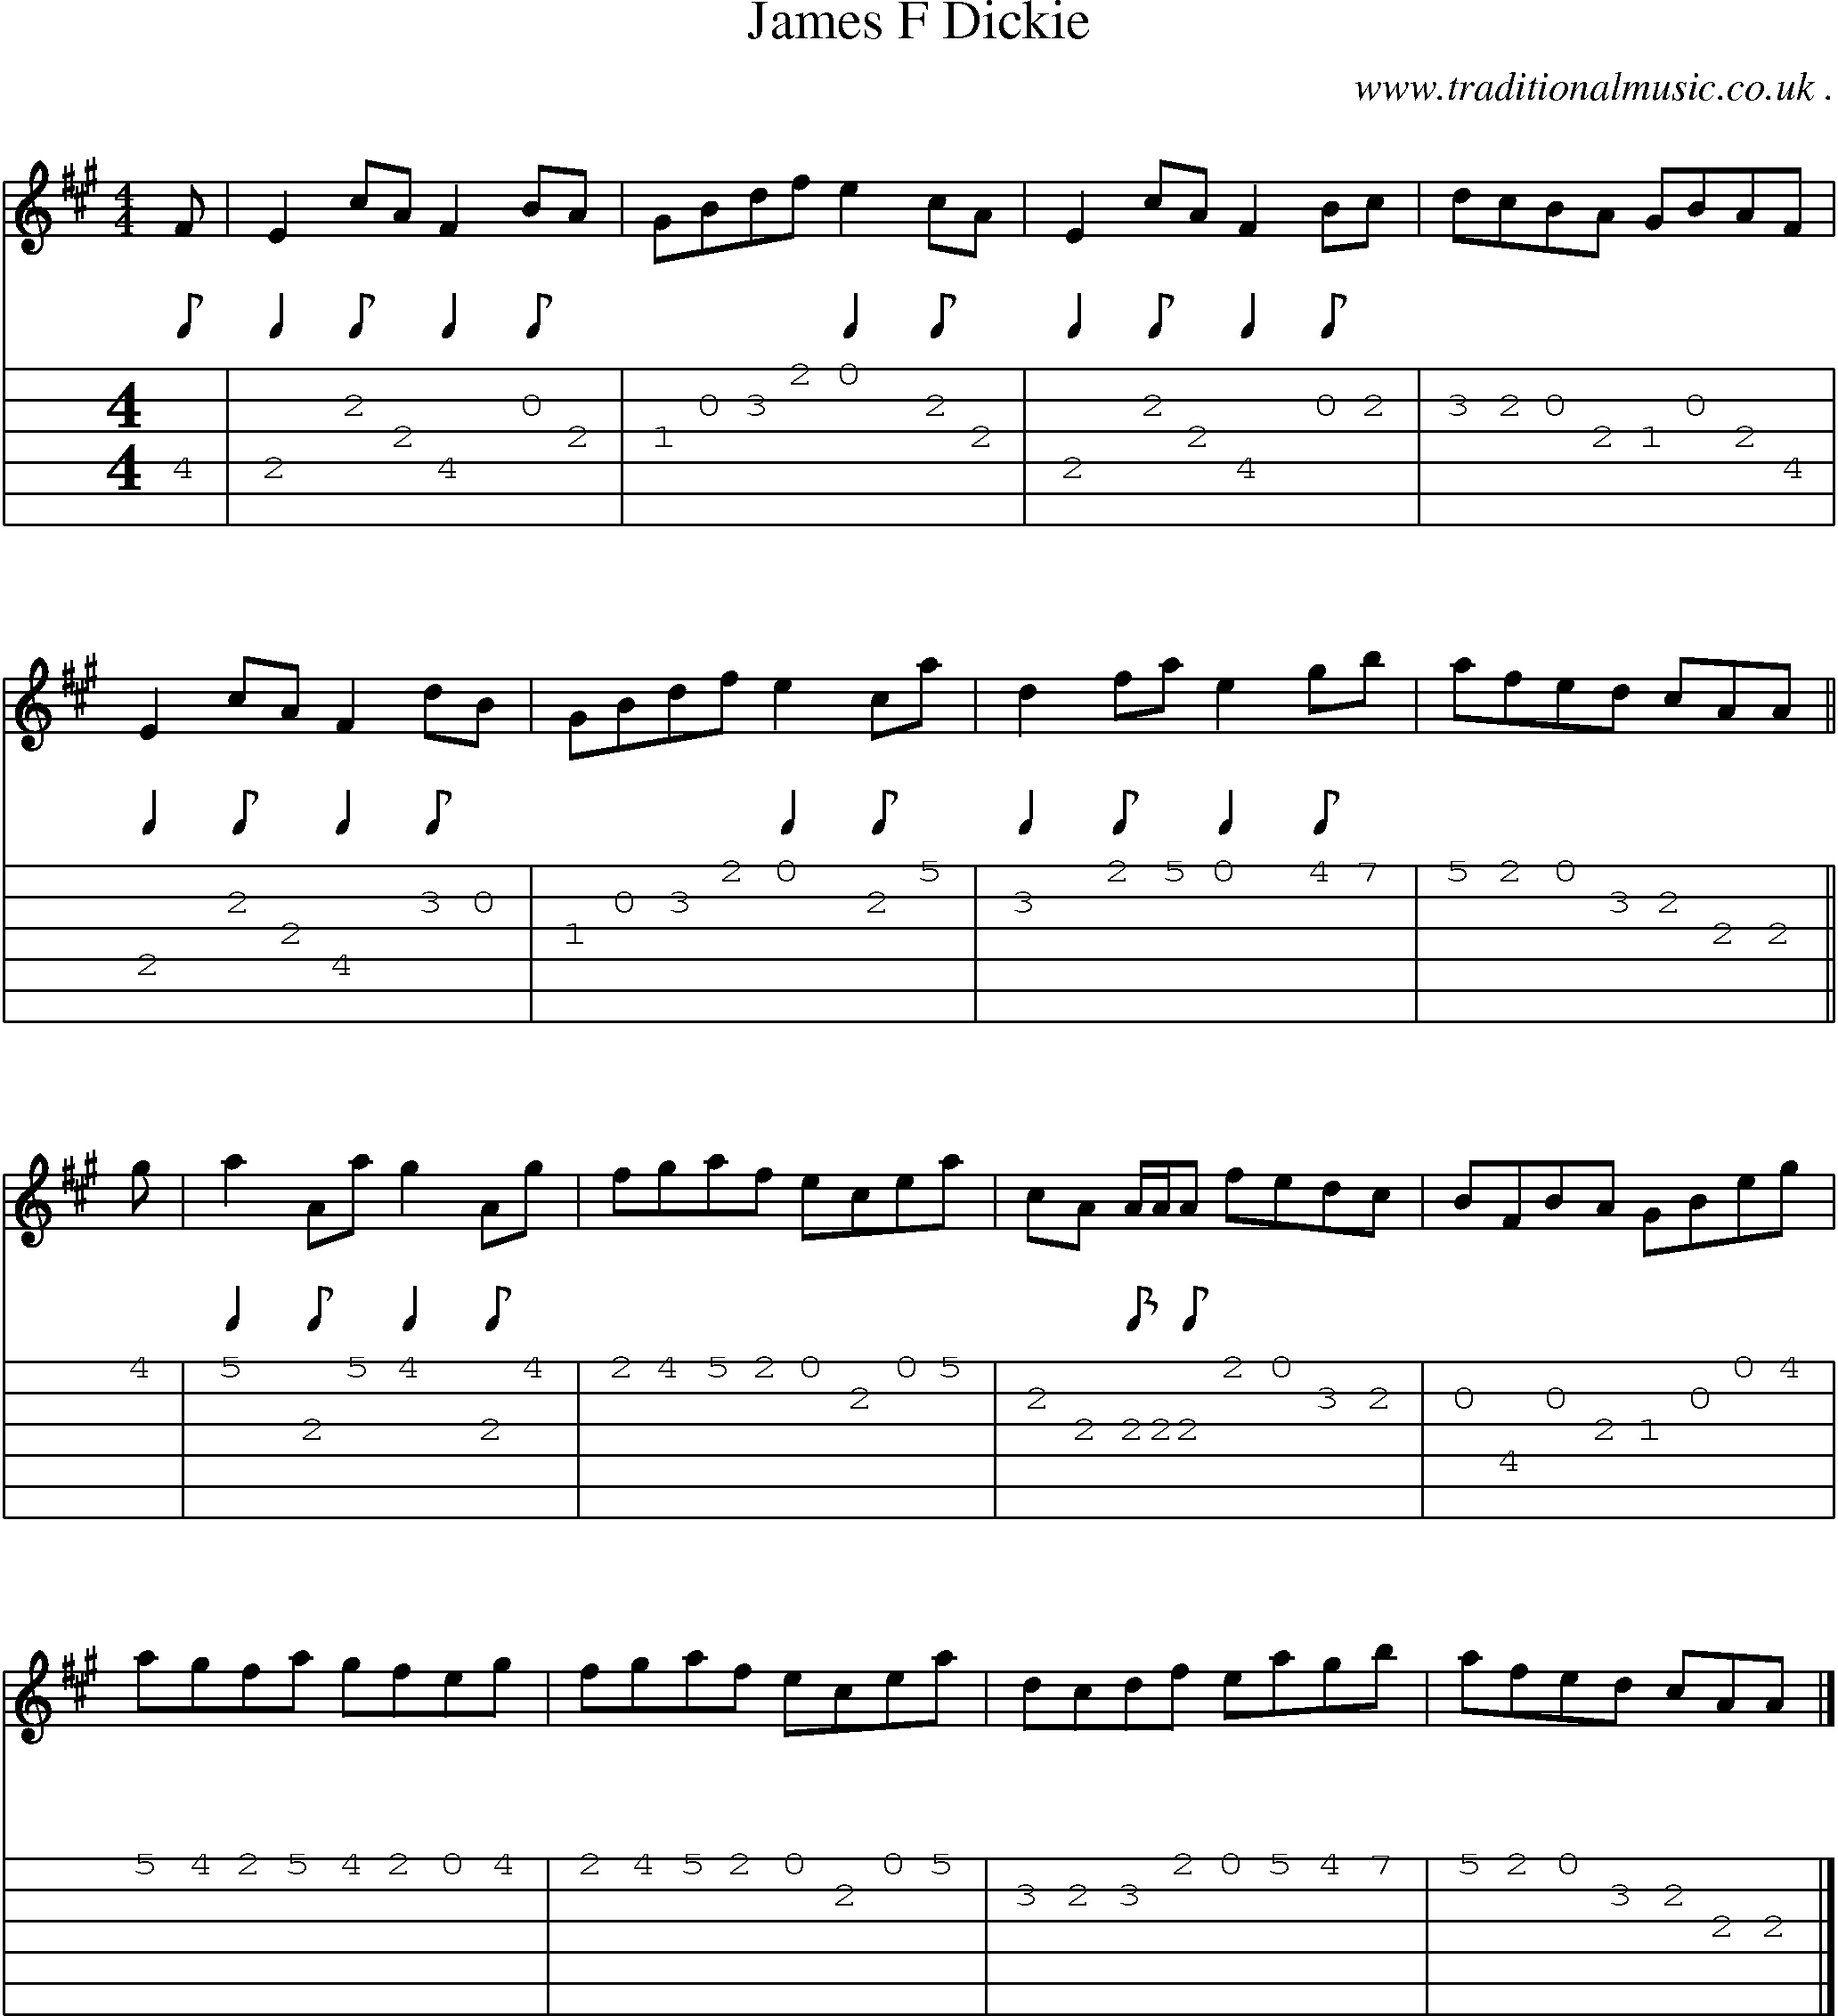 Sheet-music  score, Chords and Guitar Tabs for James F Dickie